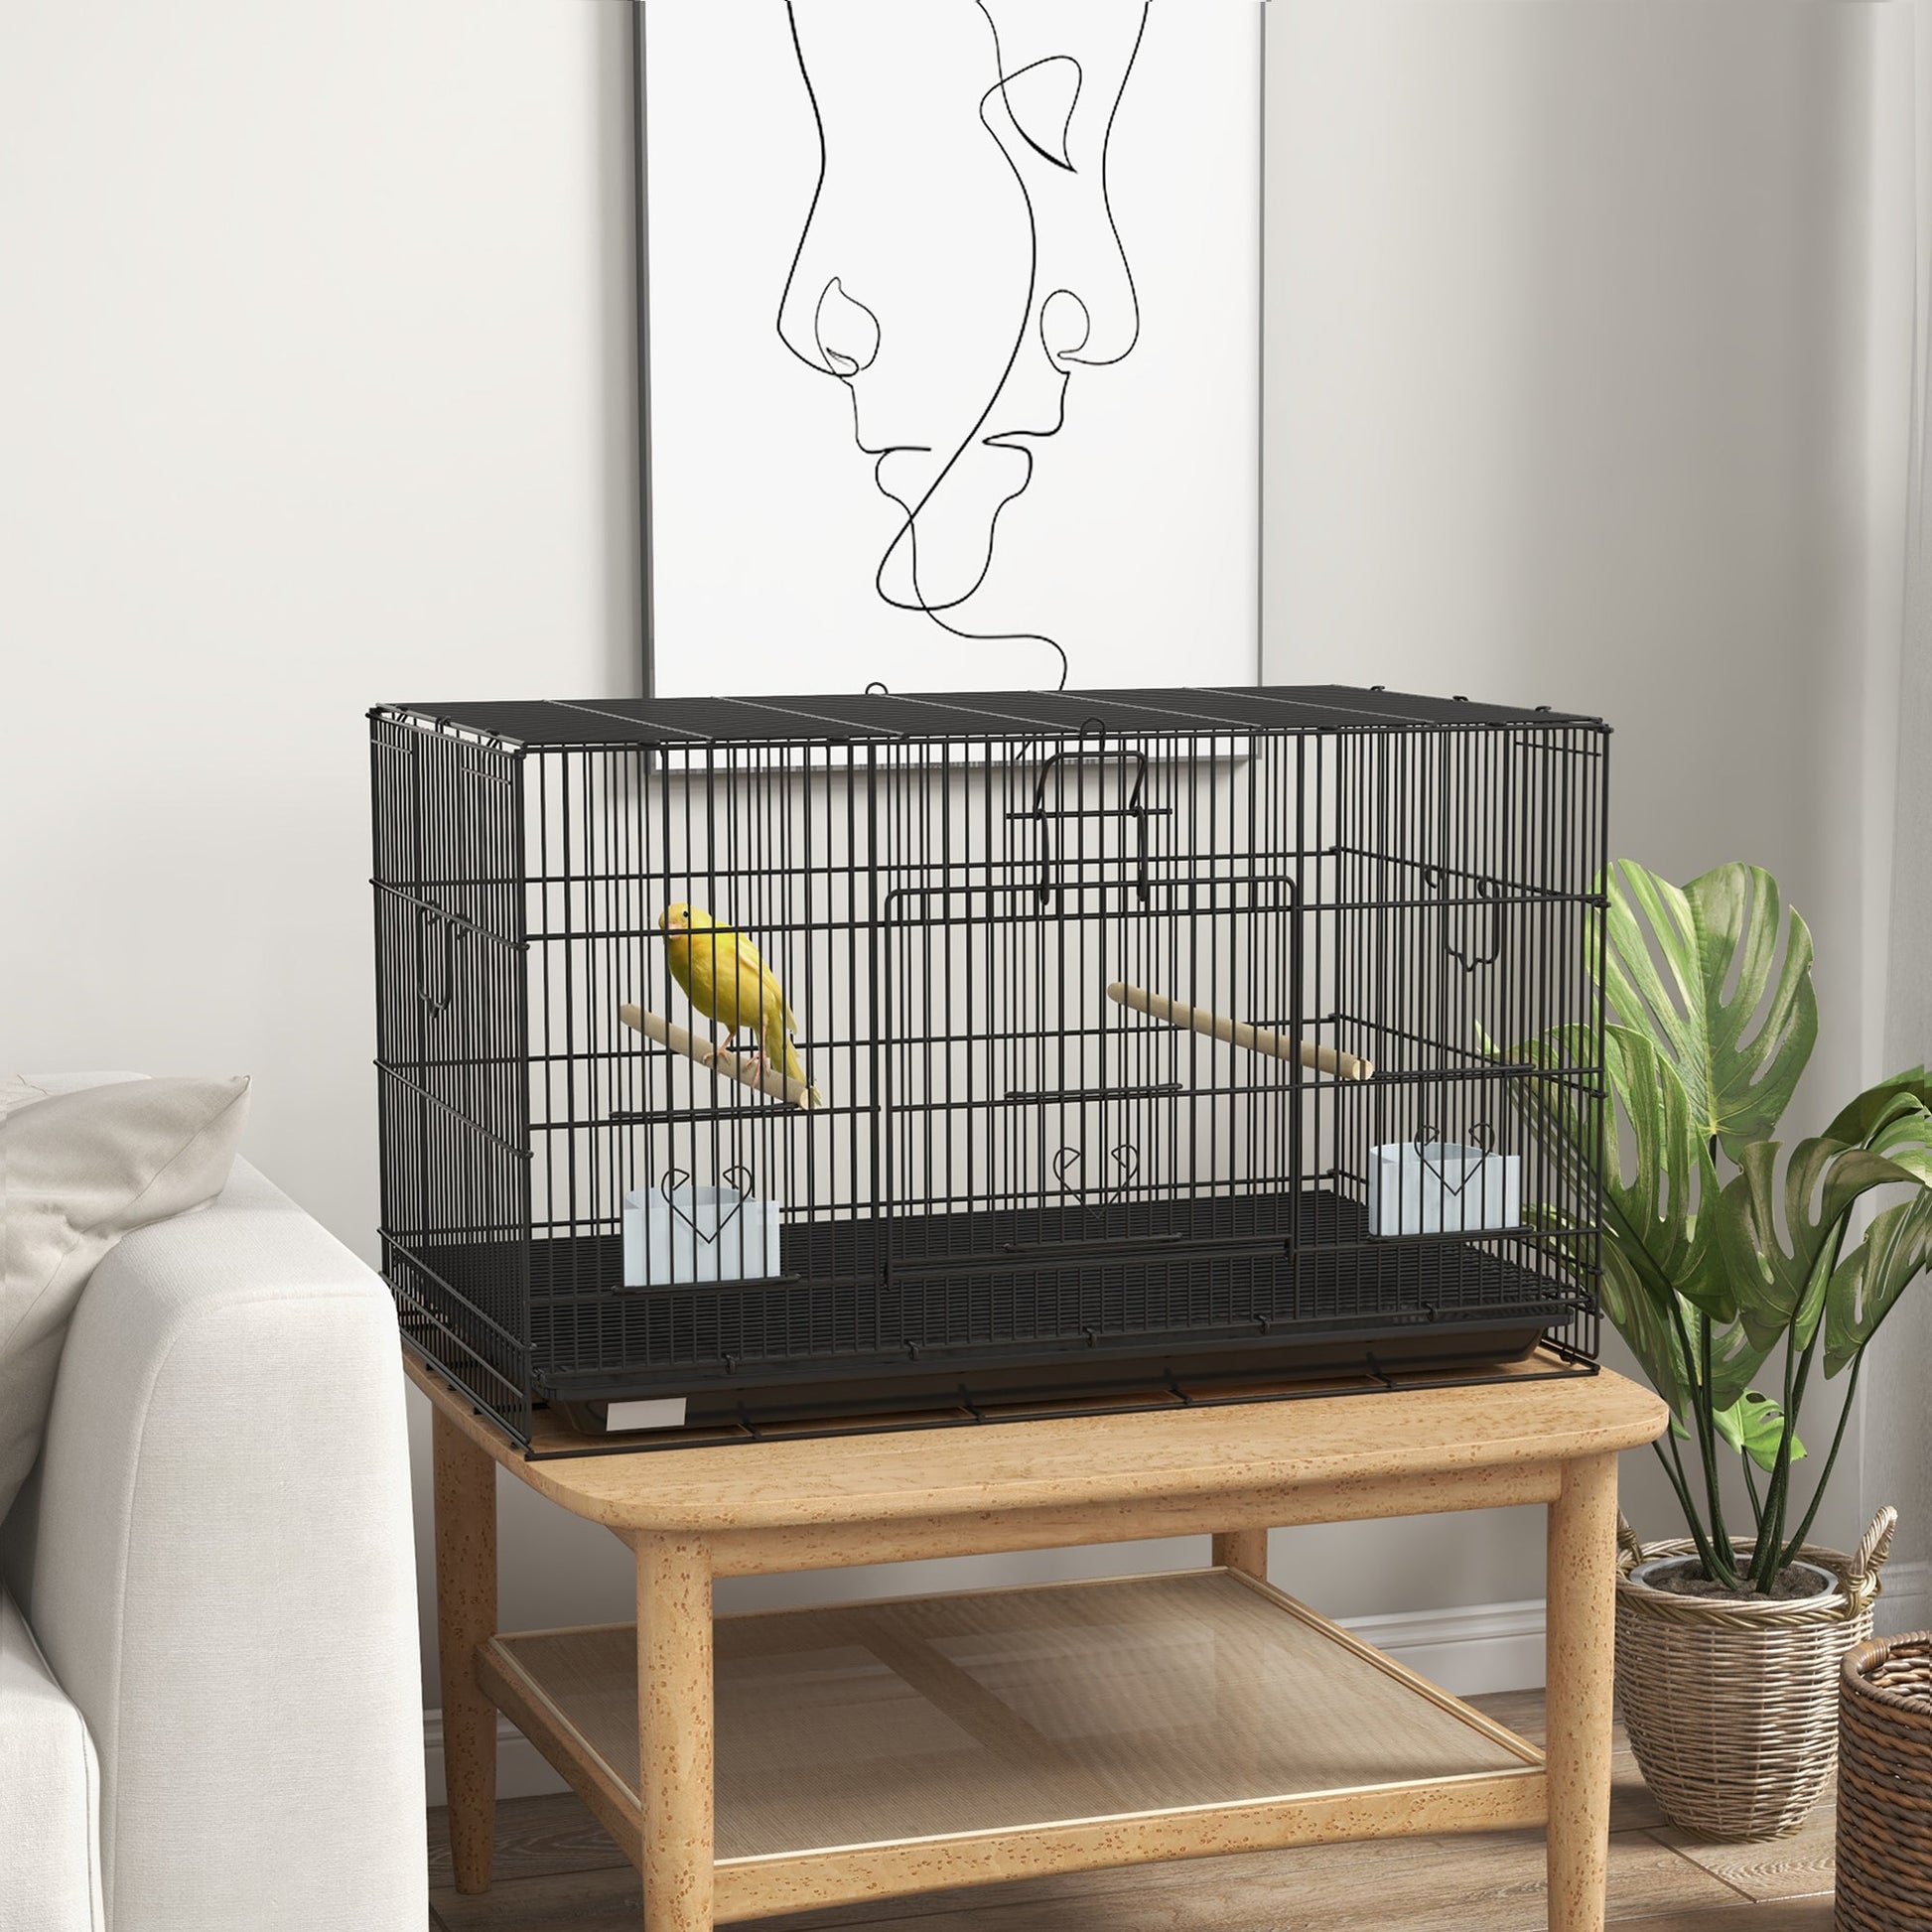 30" Birdcage for Canaries, Lovebirds Finches, Budgie Cage with Removable Tray, Bottom Mesh Panel, Wooden Perches, Food Containers at Gallery Canada